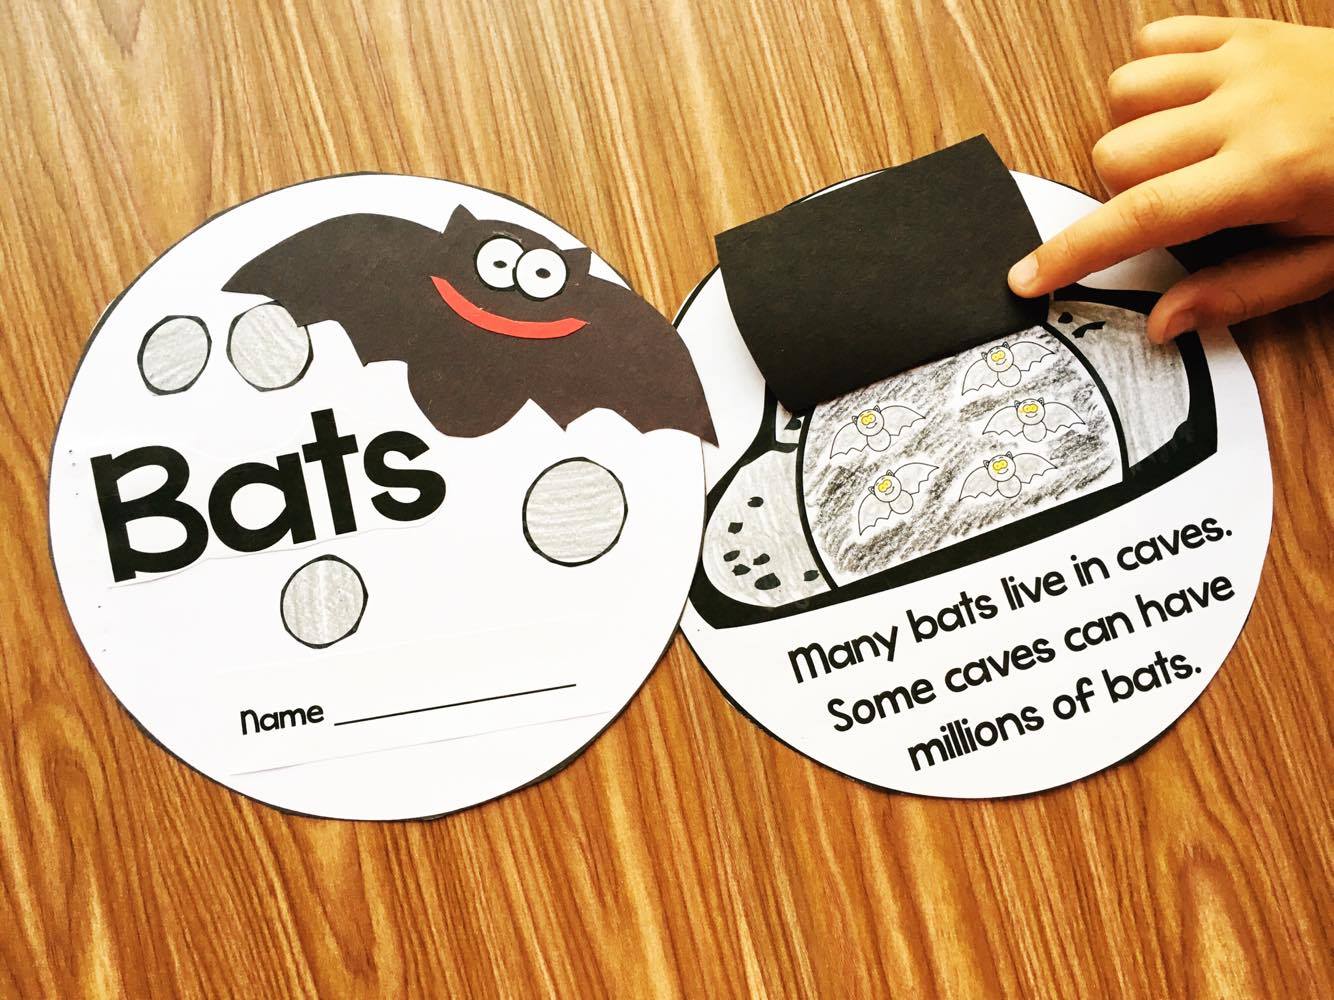 Bats Kindergarten Interactive Story loaded with facts about bats and activities to reinforce the skills.